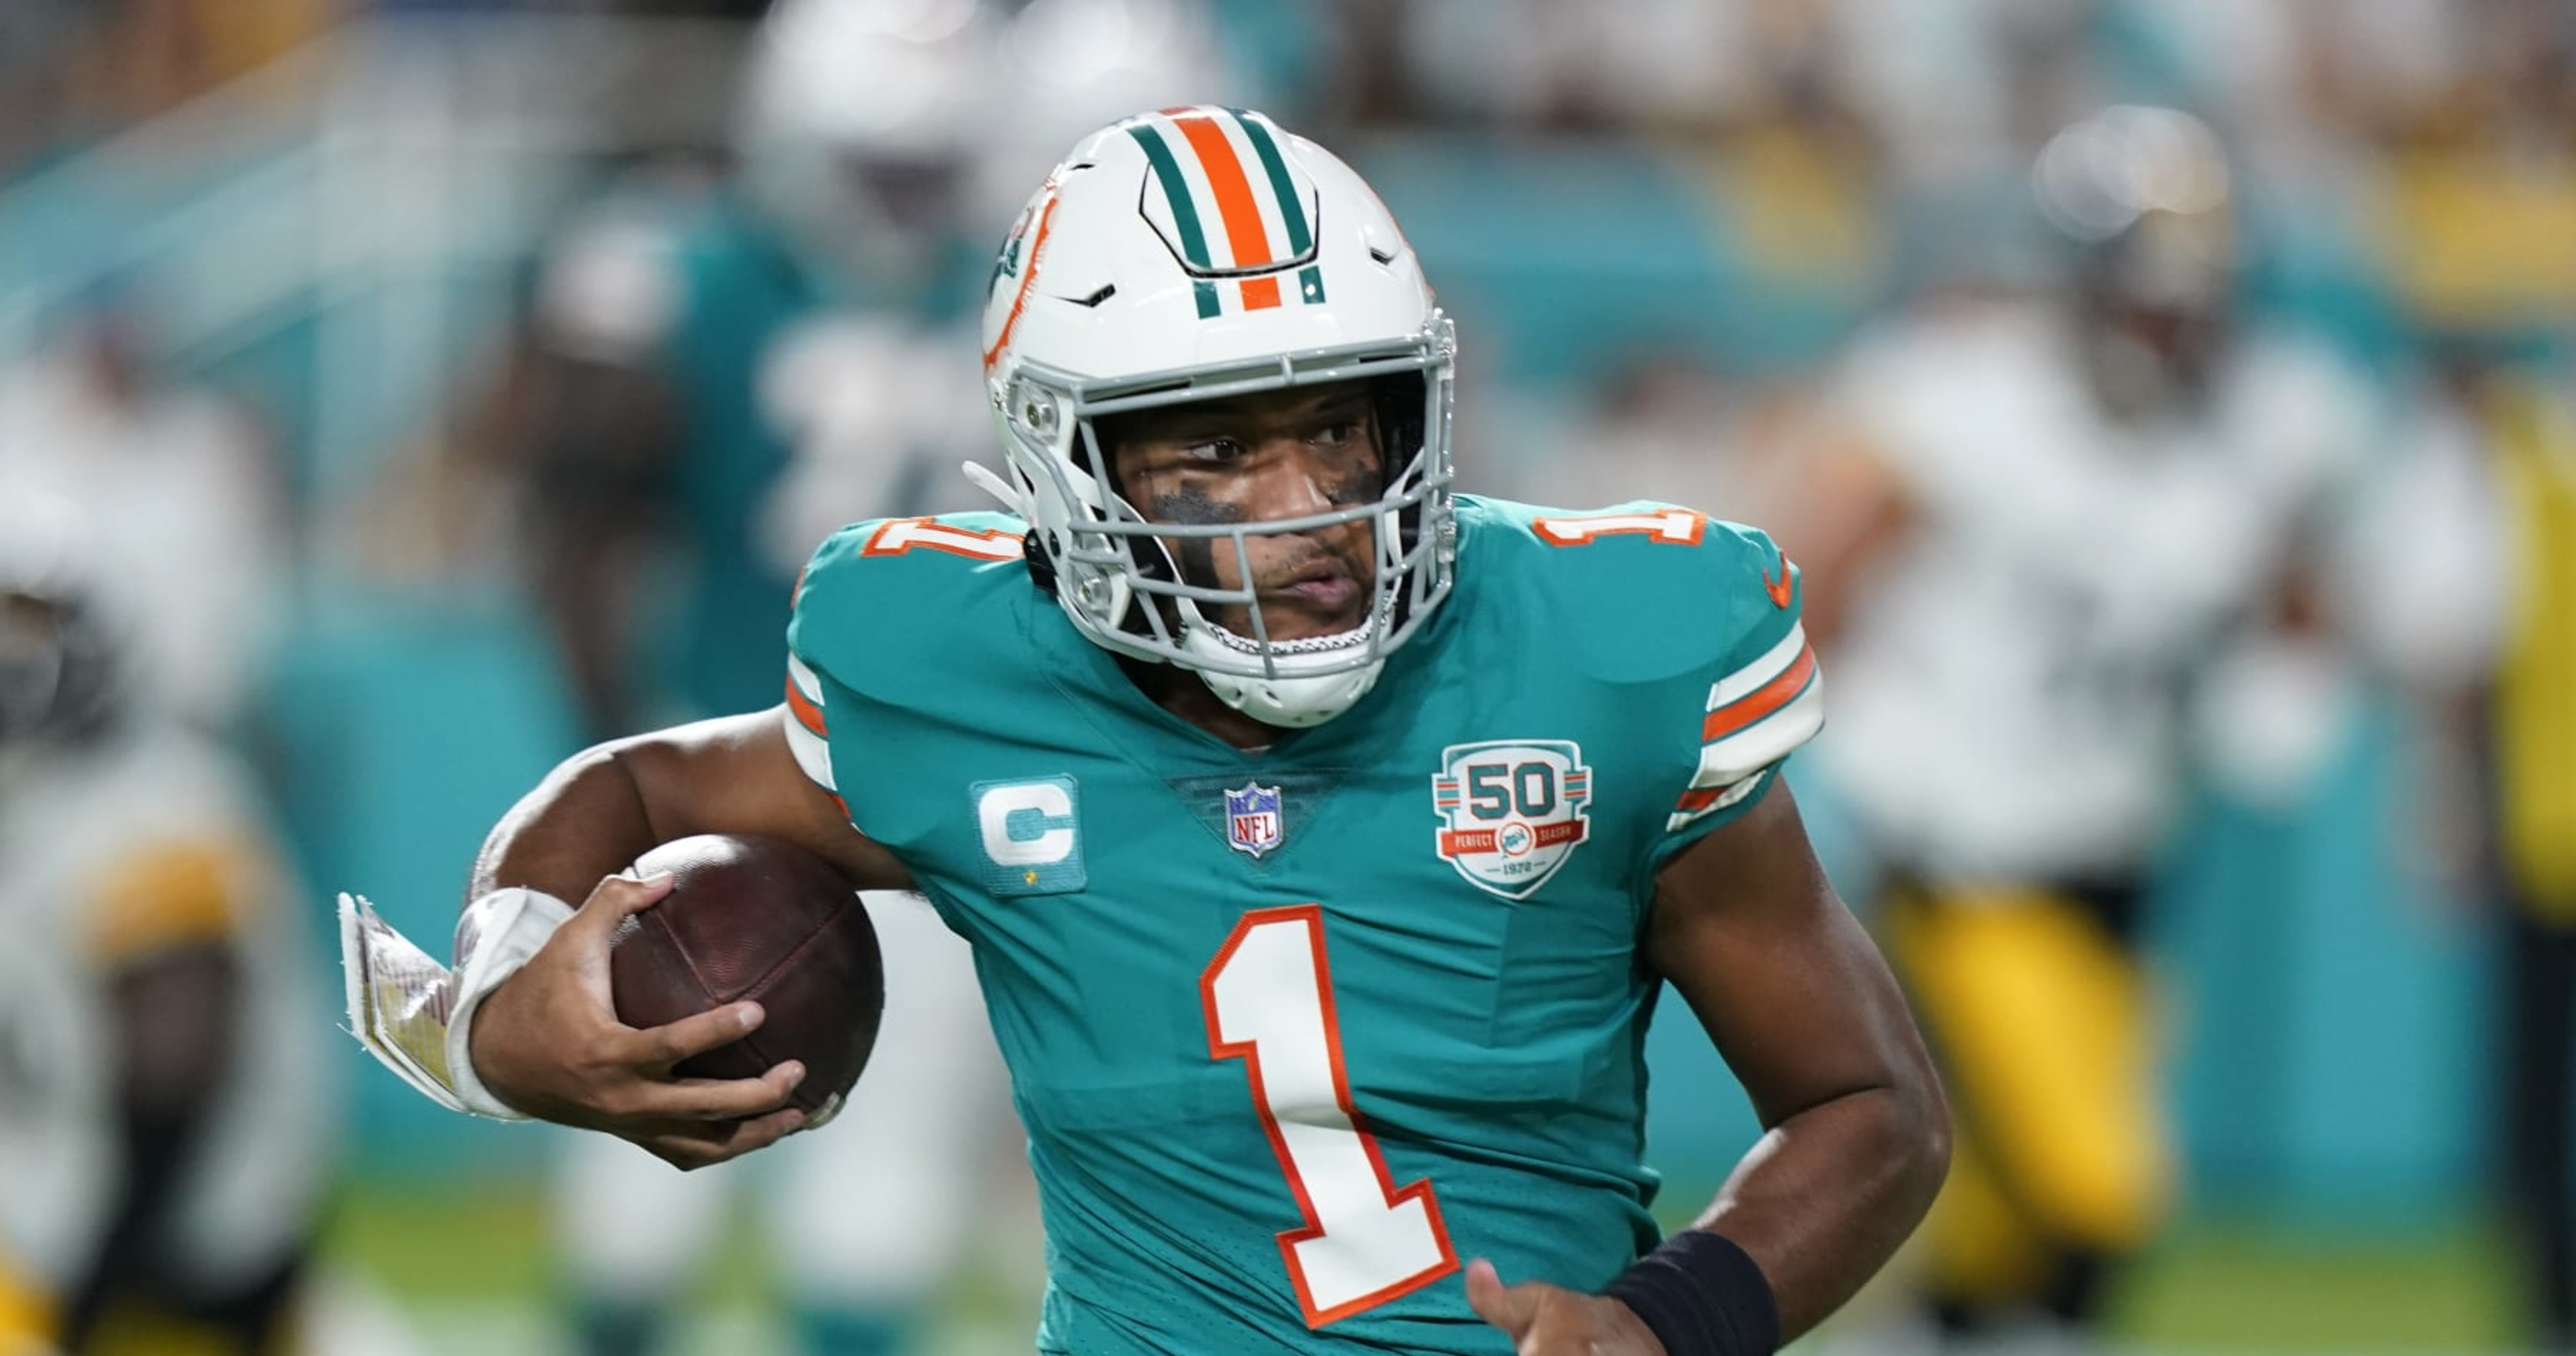 NFL Twitter Thrilled By Tua's 'Fearless' Return in Dolphins' Win vs. Steelers